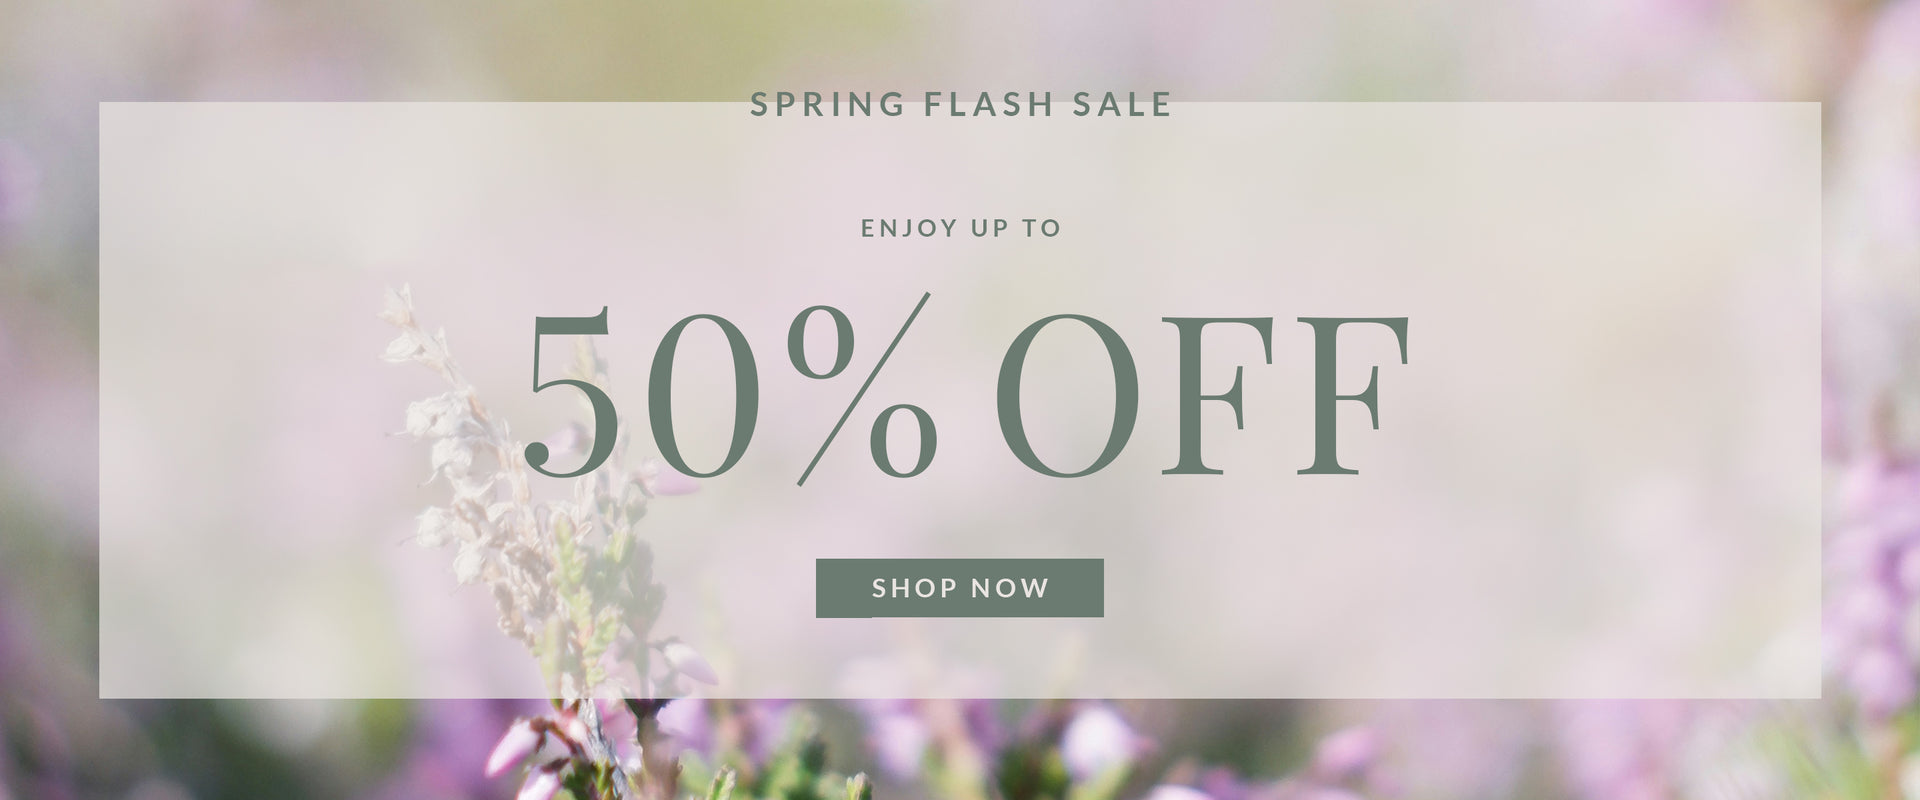 Spring Flash Sale - Up to 50% off